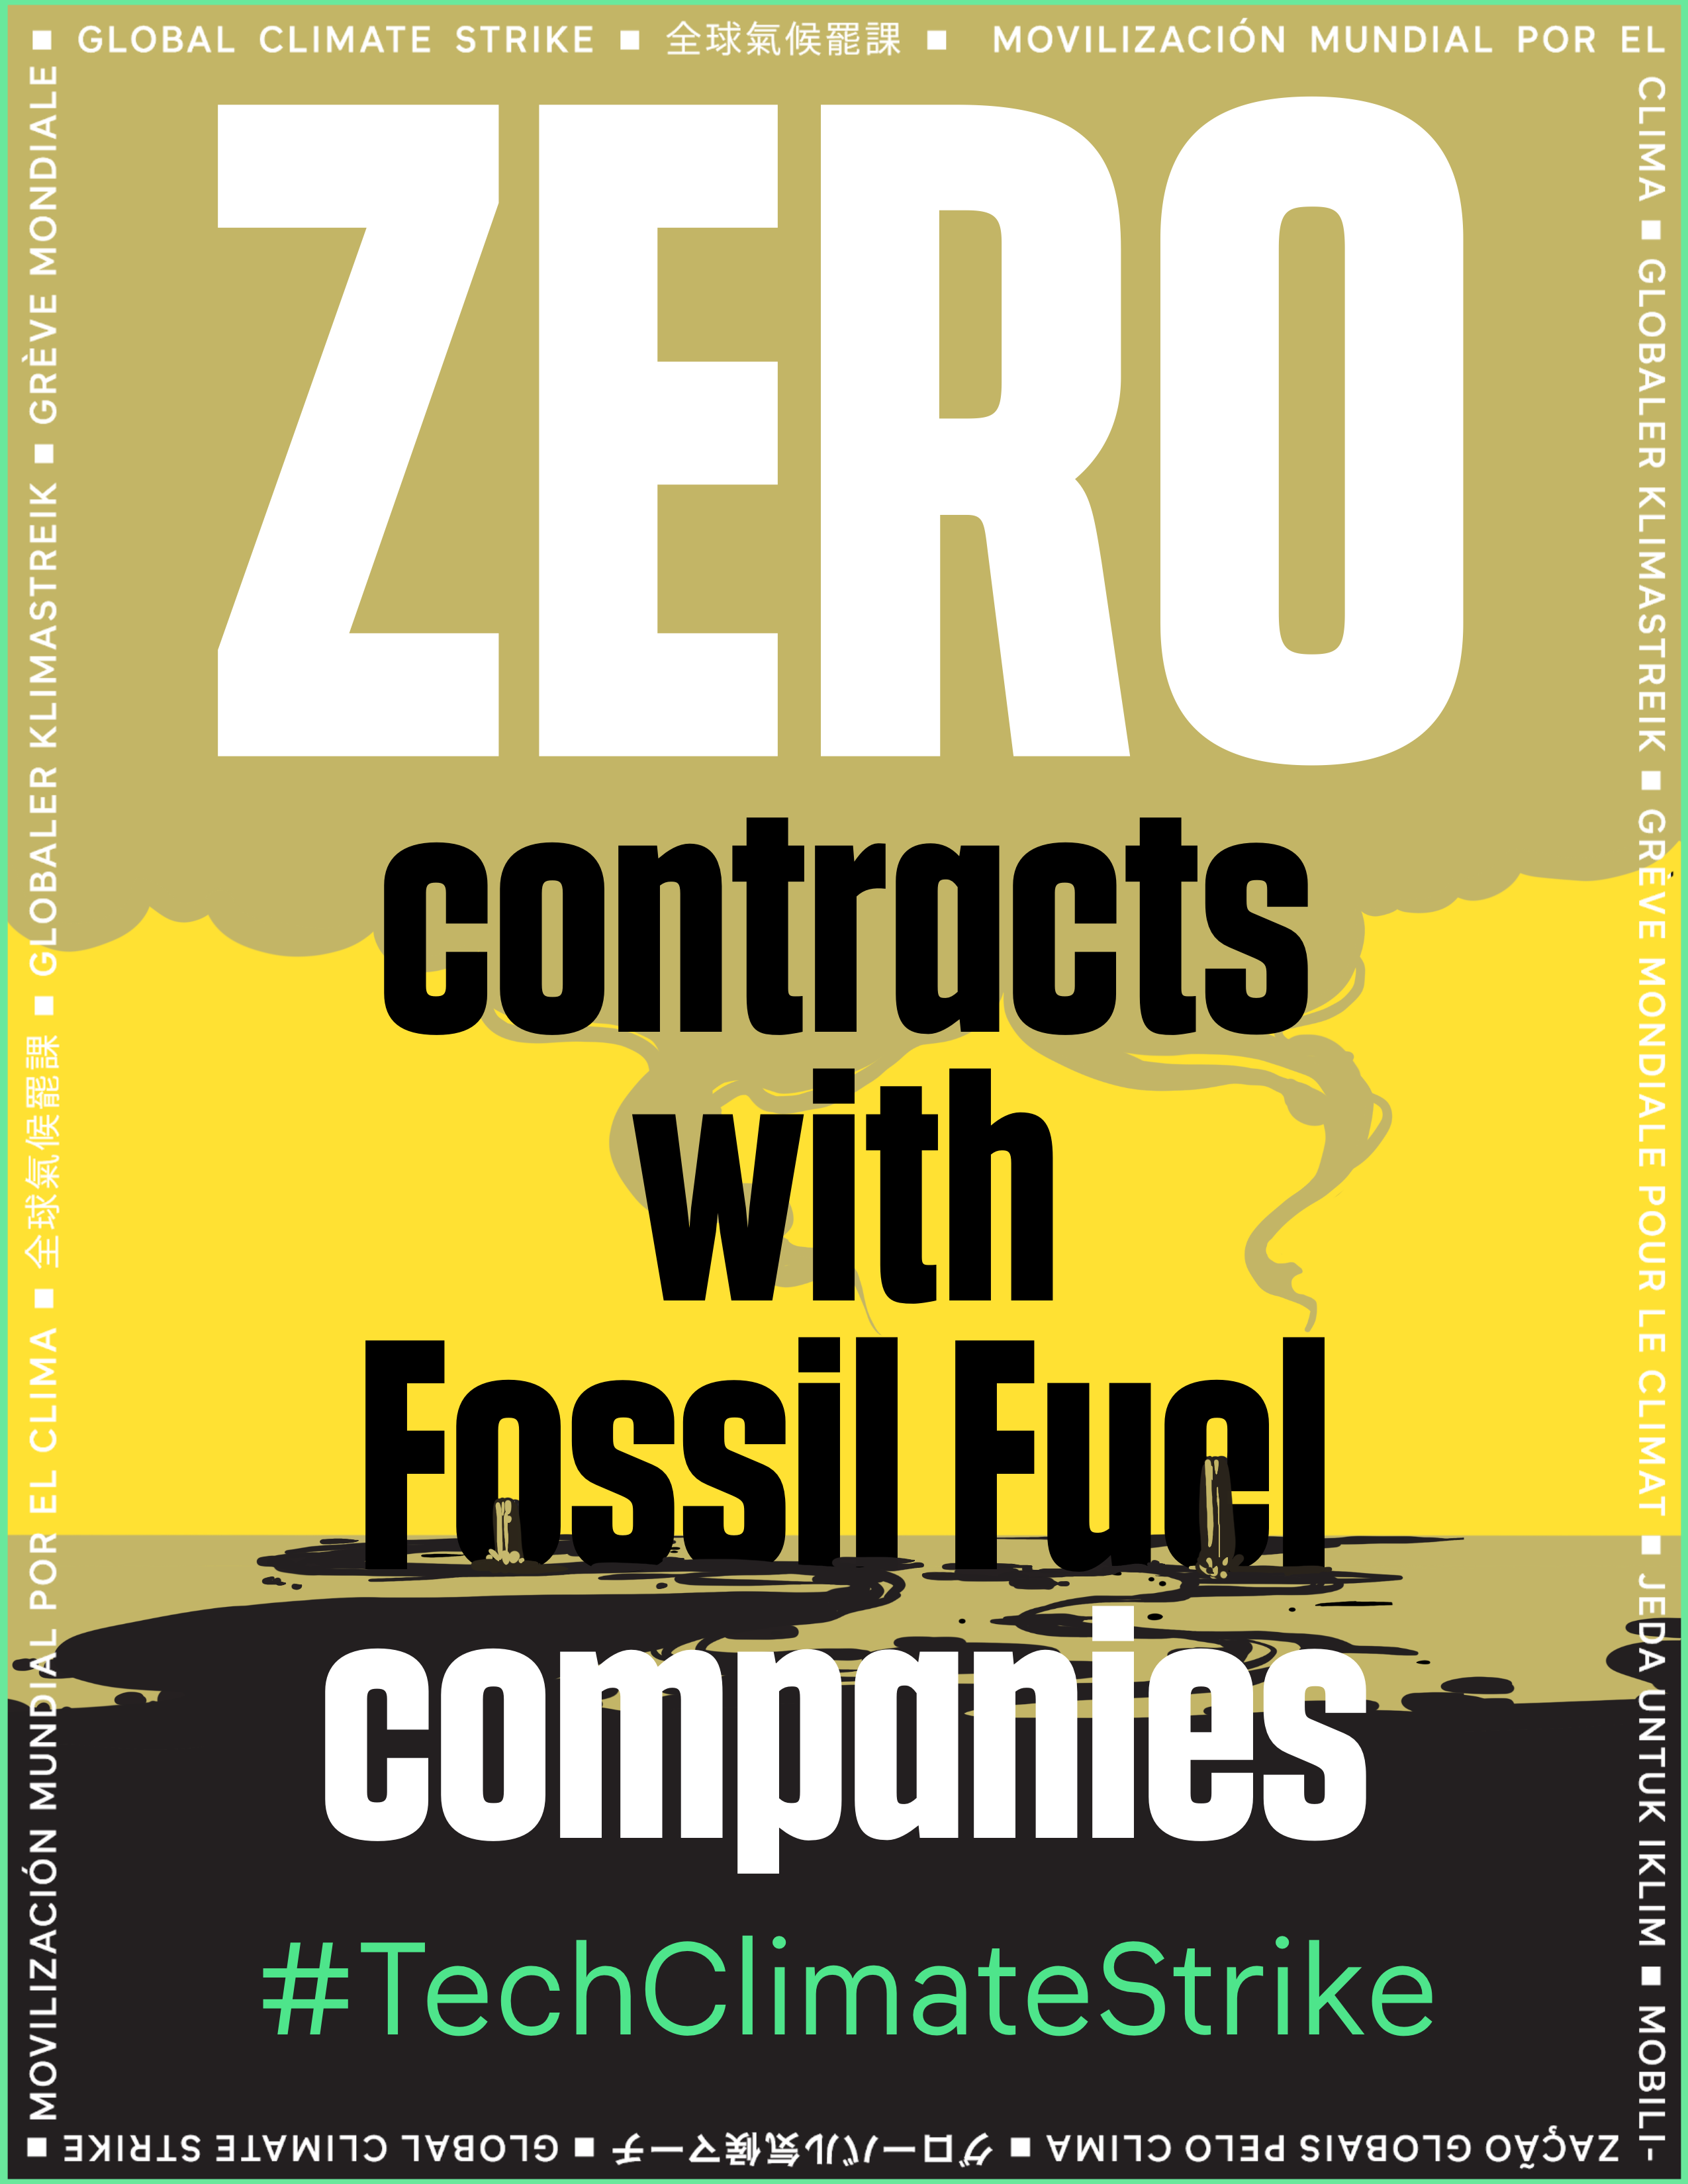 Zero contracts with fossil fuel companies